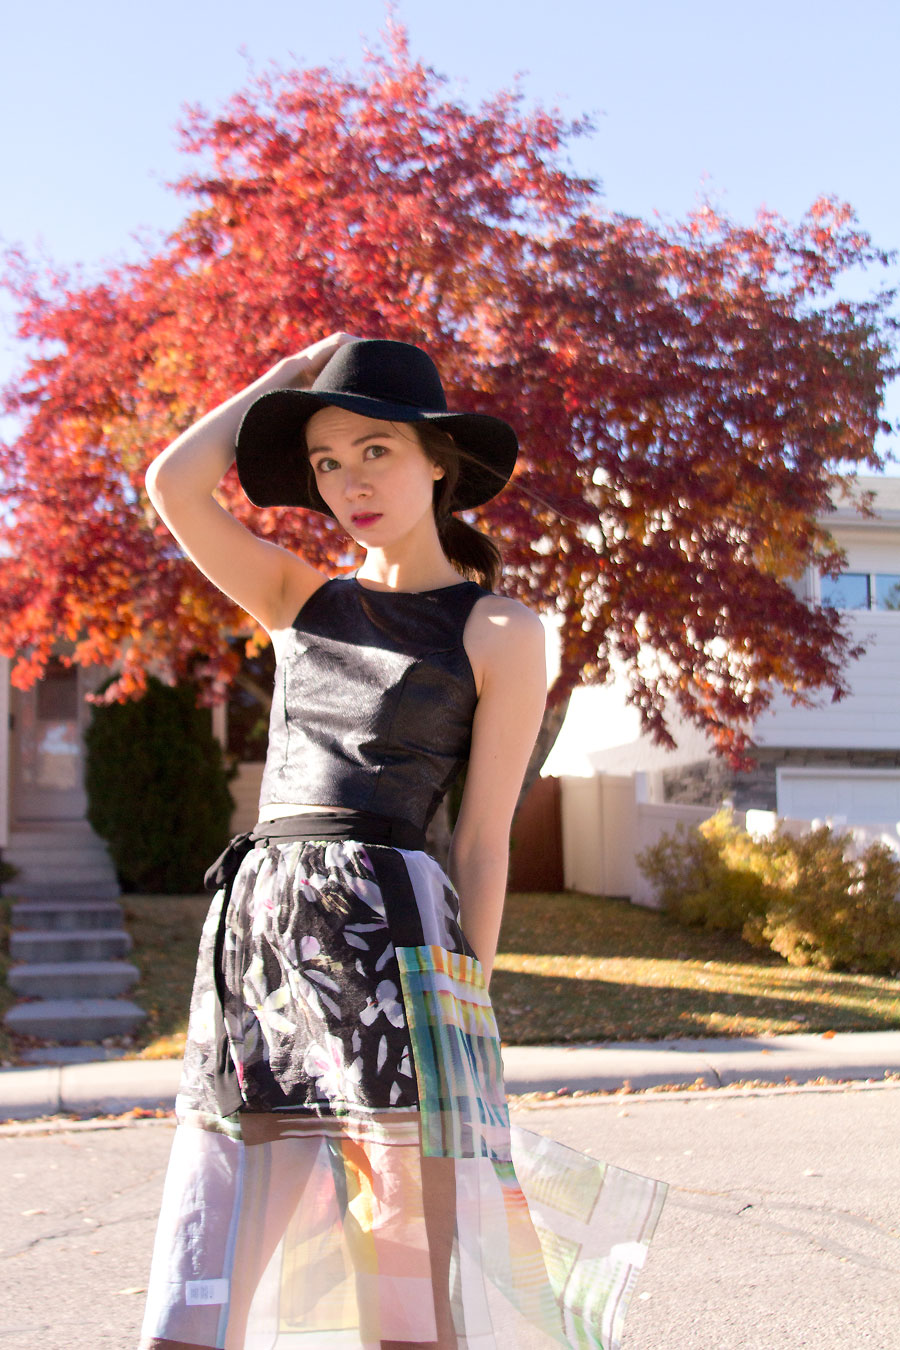 fall fashion, clover canyon, sheer skirt, crop top, felt hat, litas, jeffrey campbell, calgary fashion, anthropologie, bohemian, fashion, style, outfit of the day, personal style